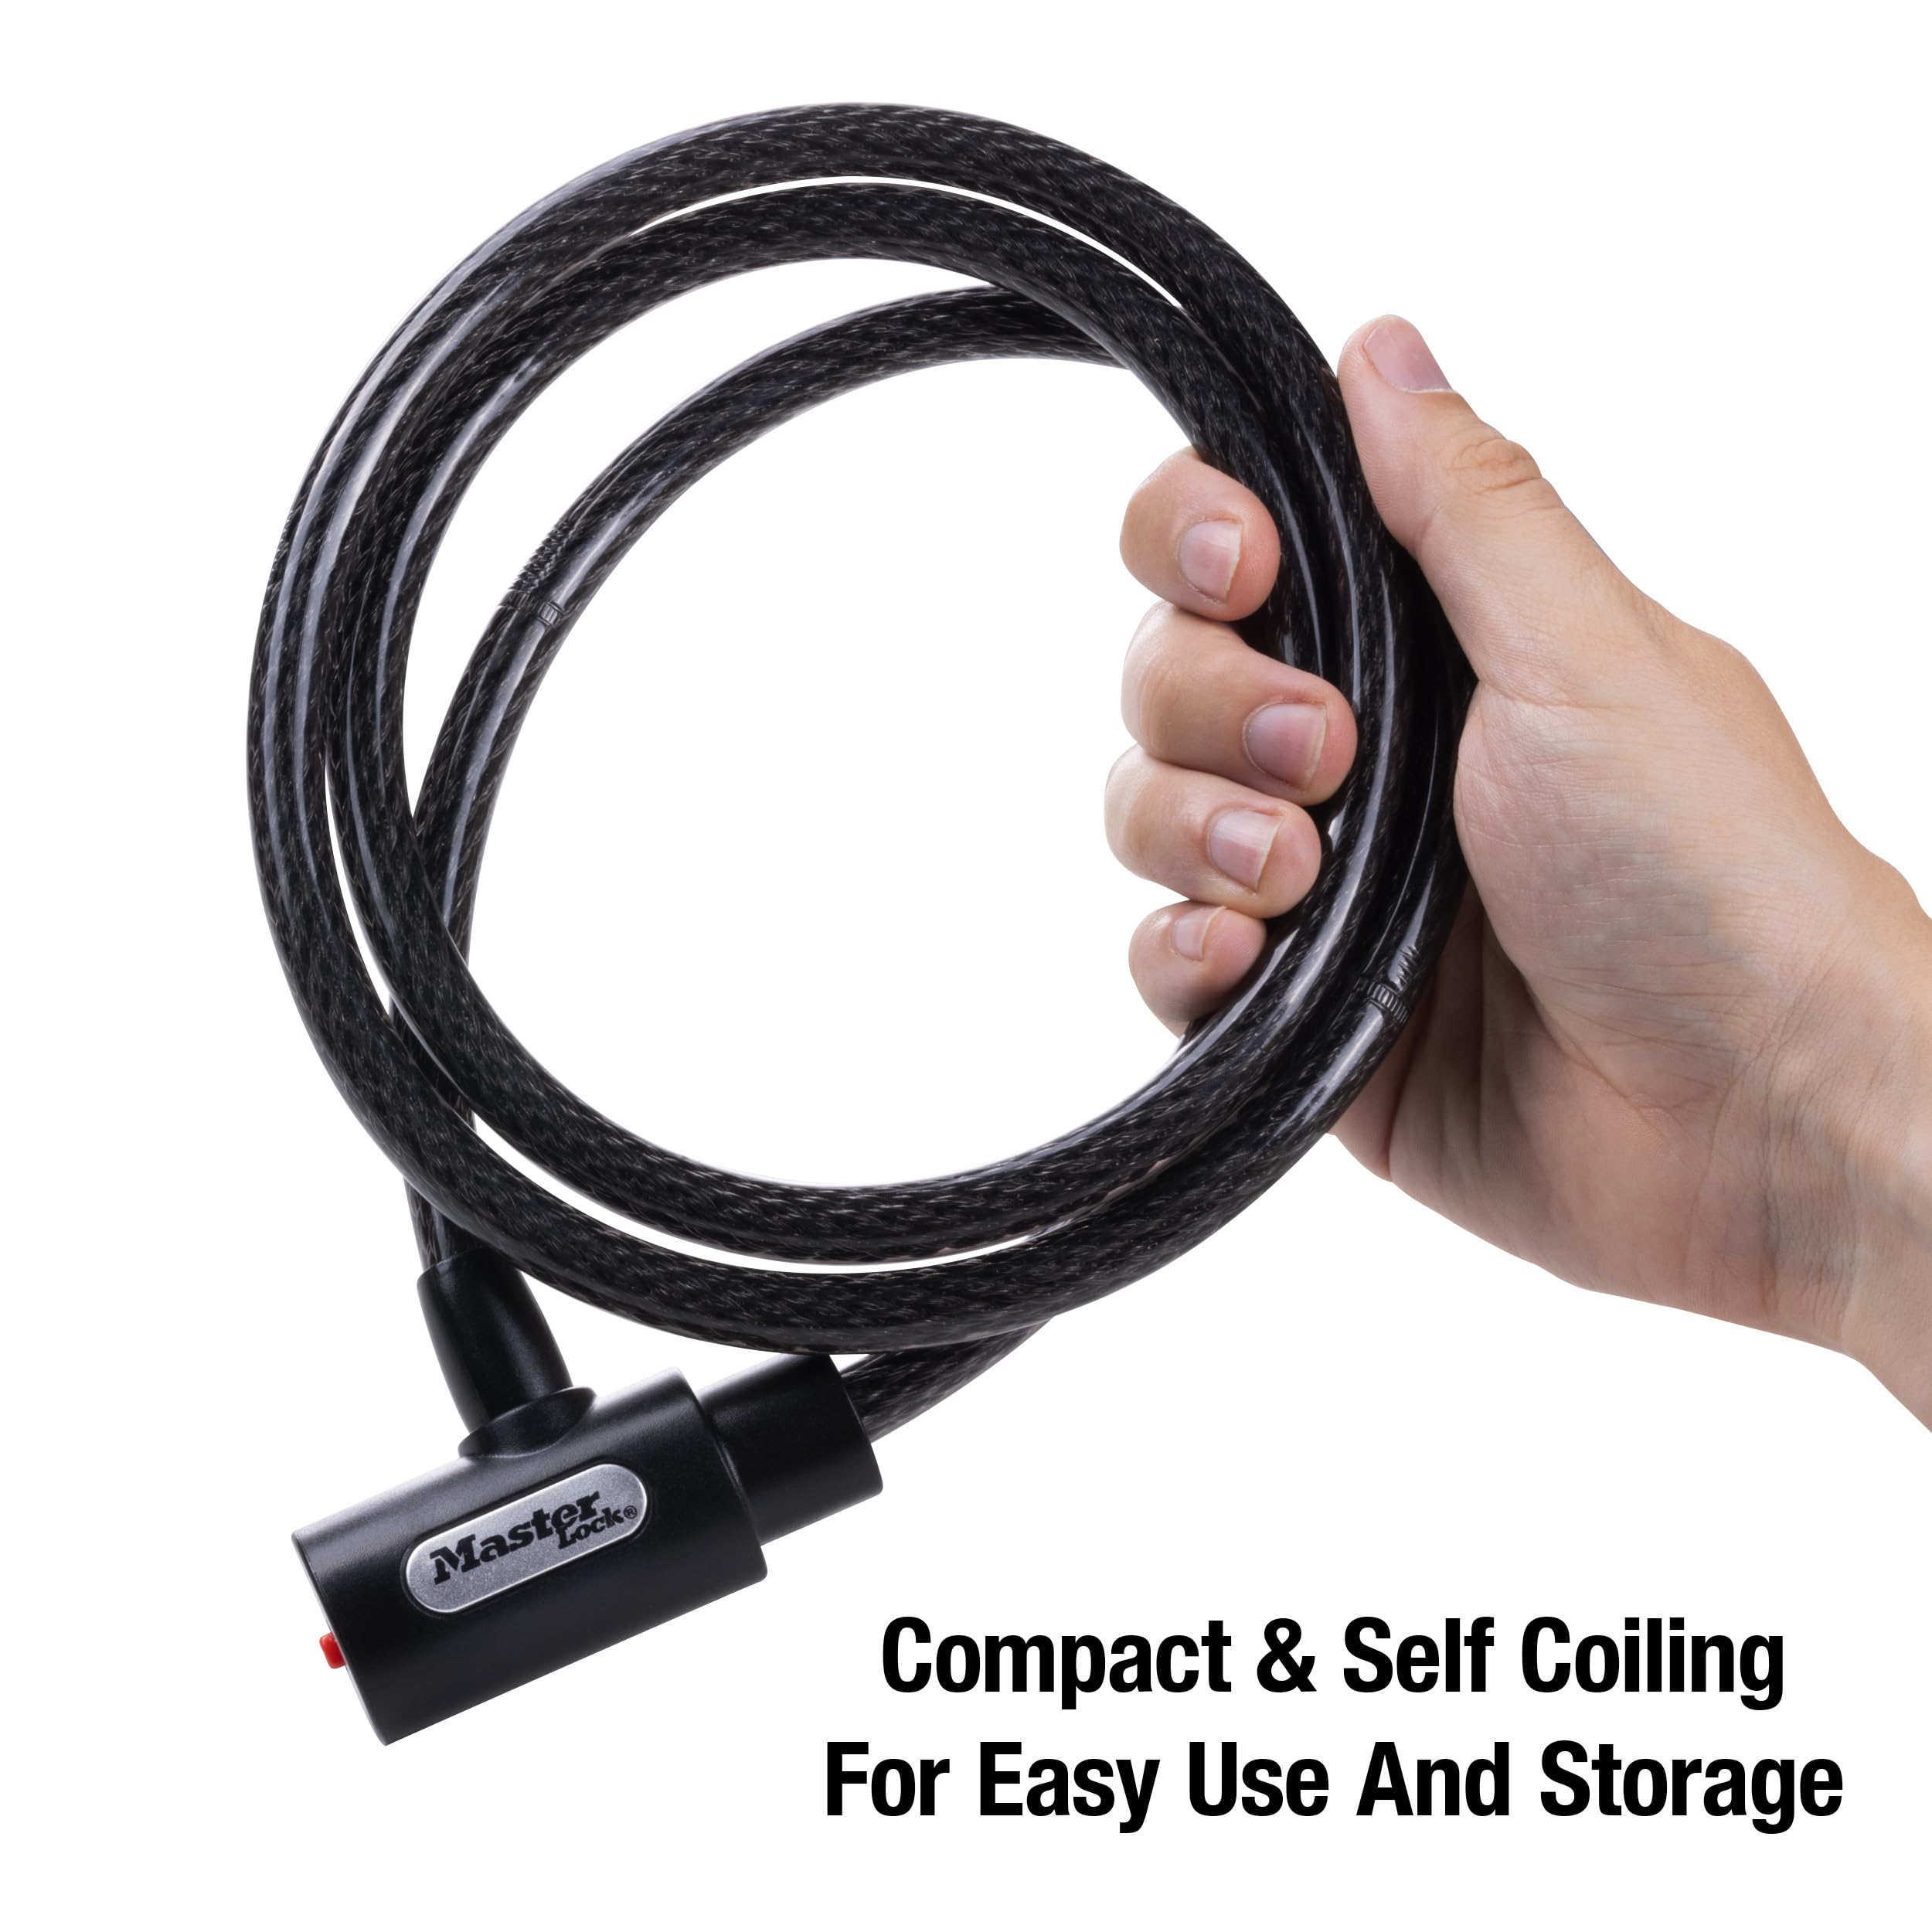 Master Lock 8364DCC Cable Bike Lock with Key, 5 ft. Long, Black